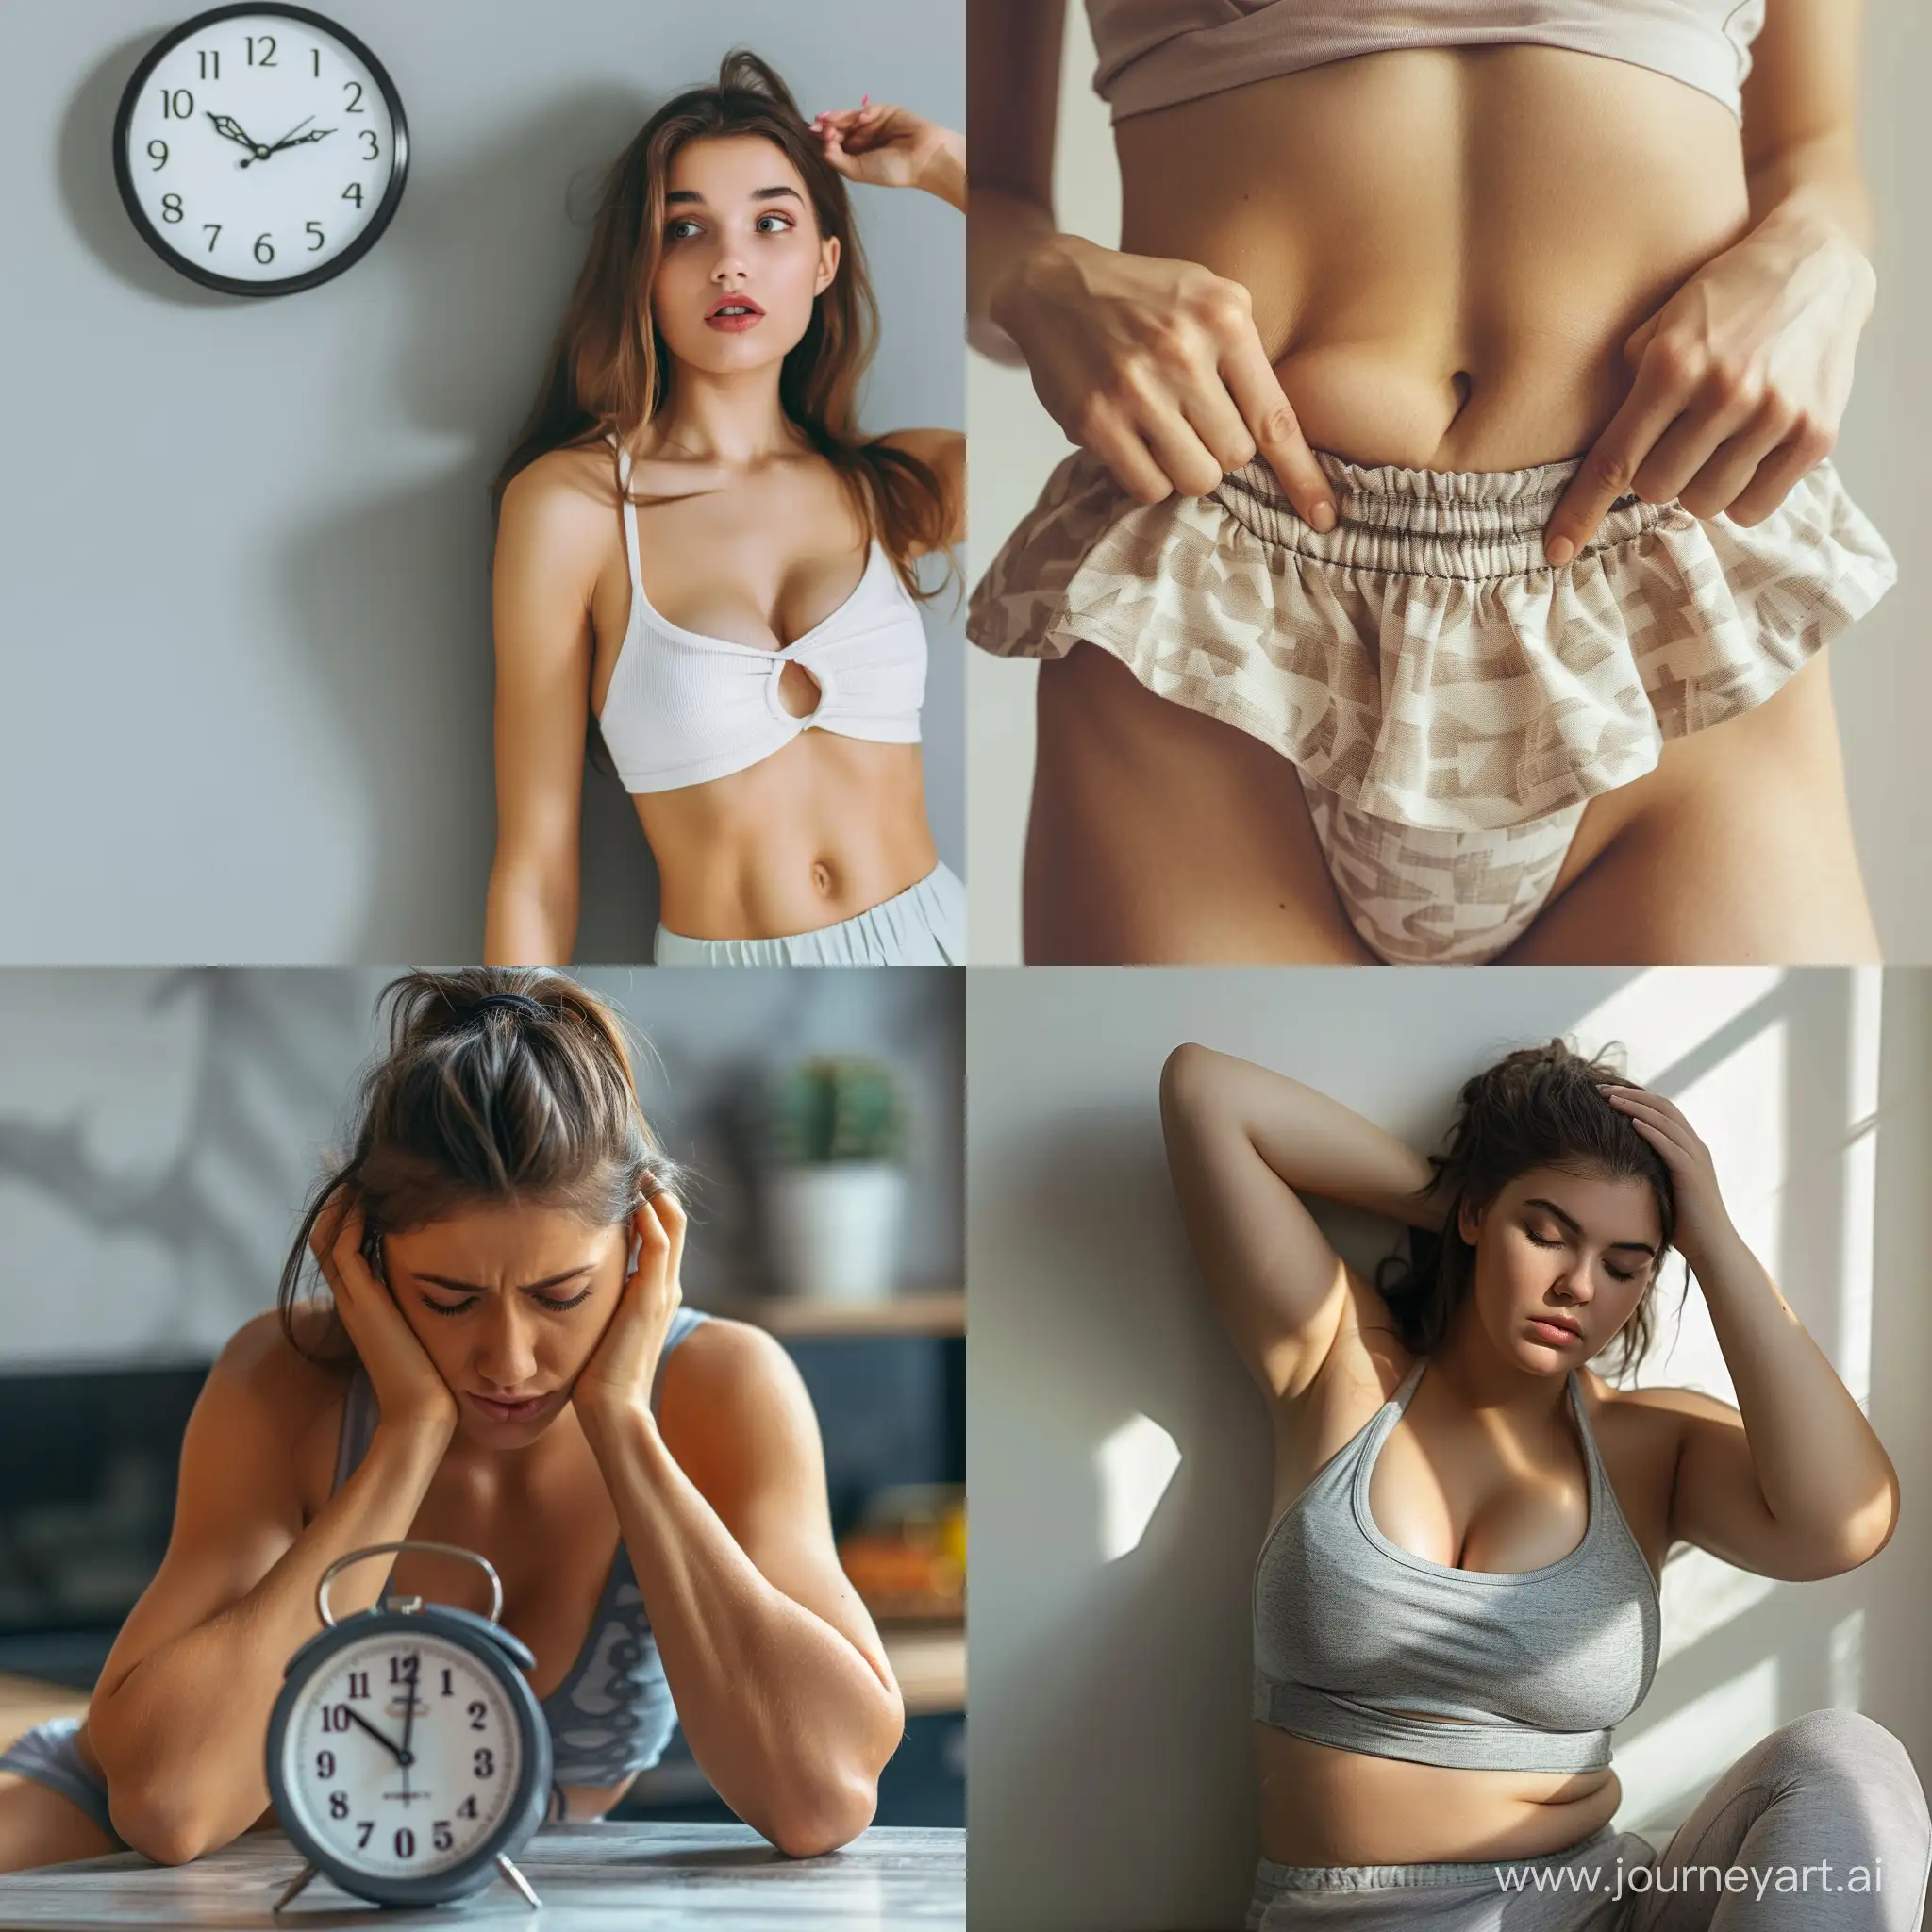 Woman-Contemplating-Weight-Loss-Motivation-and-Procrastination